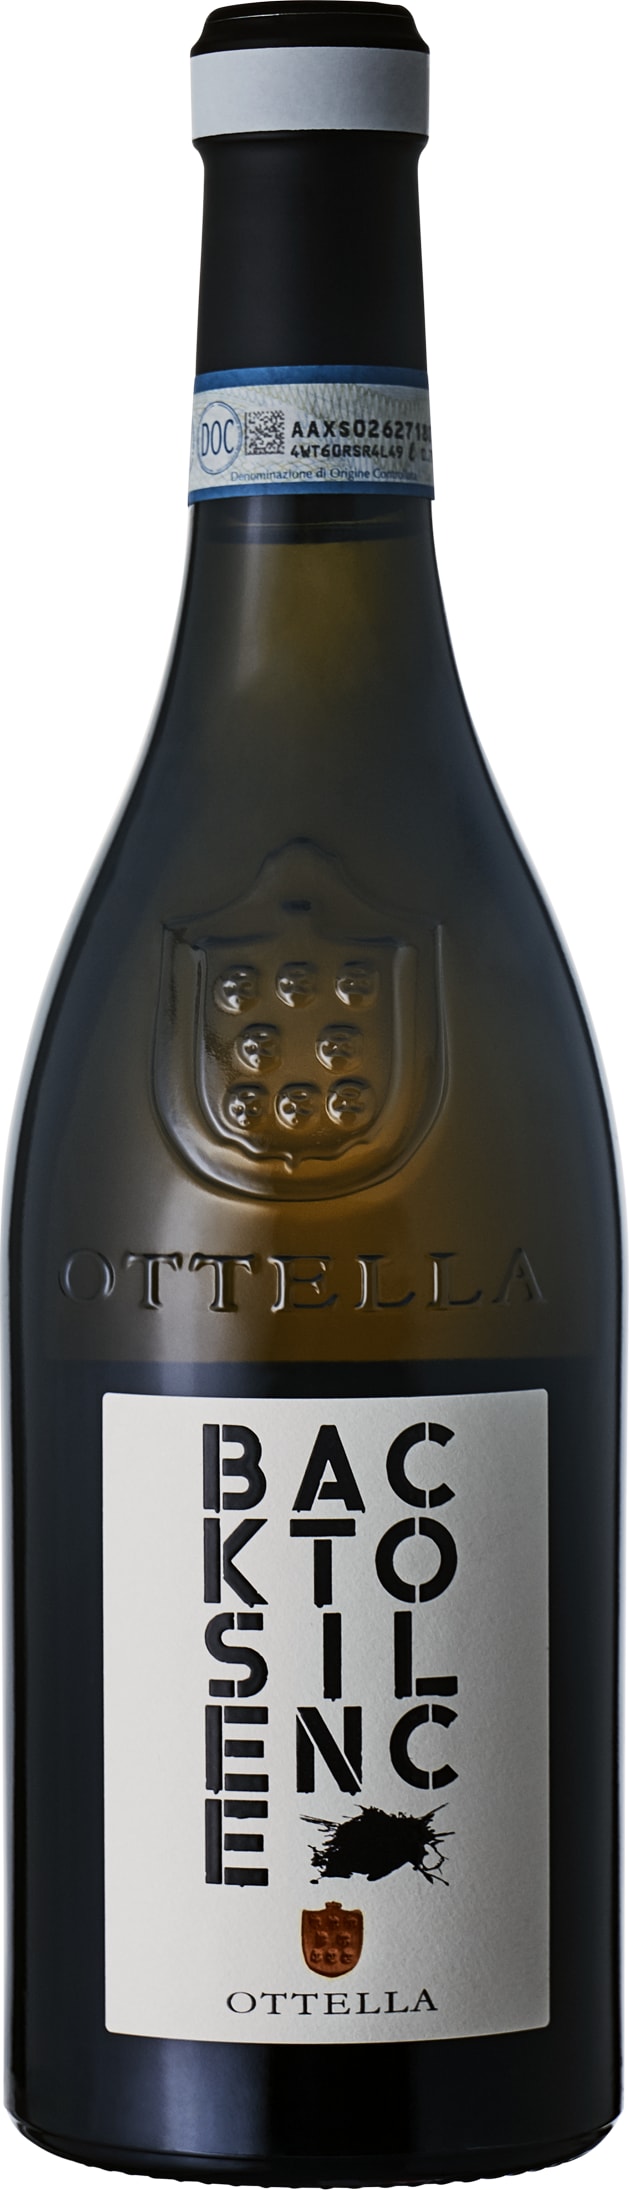 Azienda Agricola Ottella Back To Silence Orange Wine, Lugana 2022 75cl - Buy Azienda Agricola Ottella Wines from GREAT WINES DIRECT wine shop